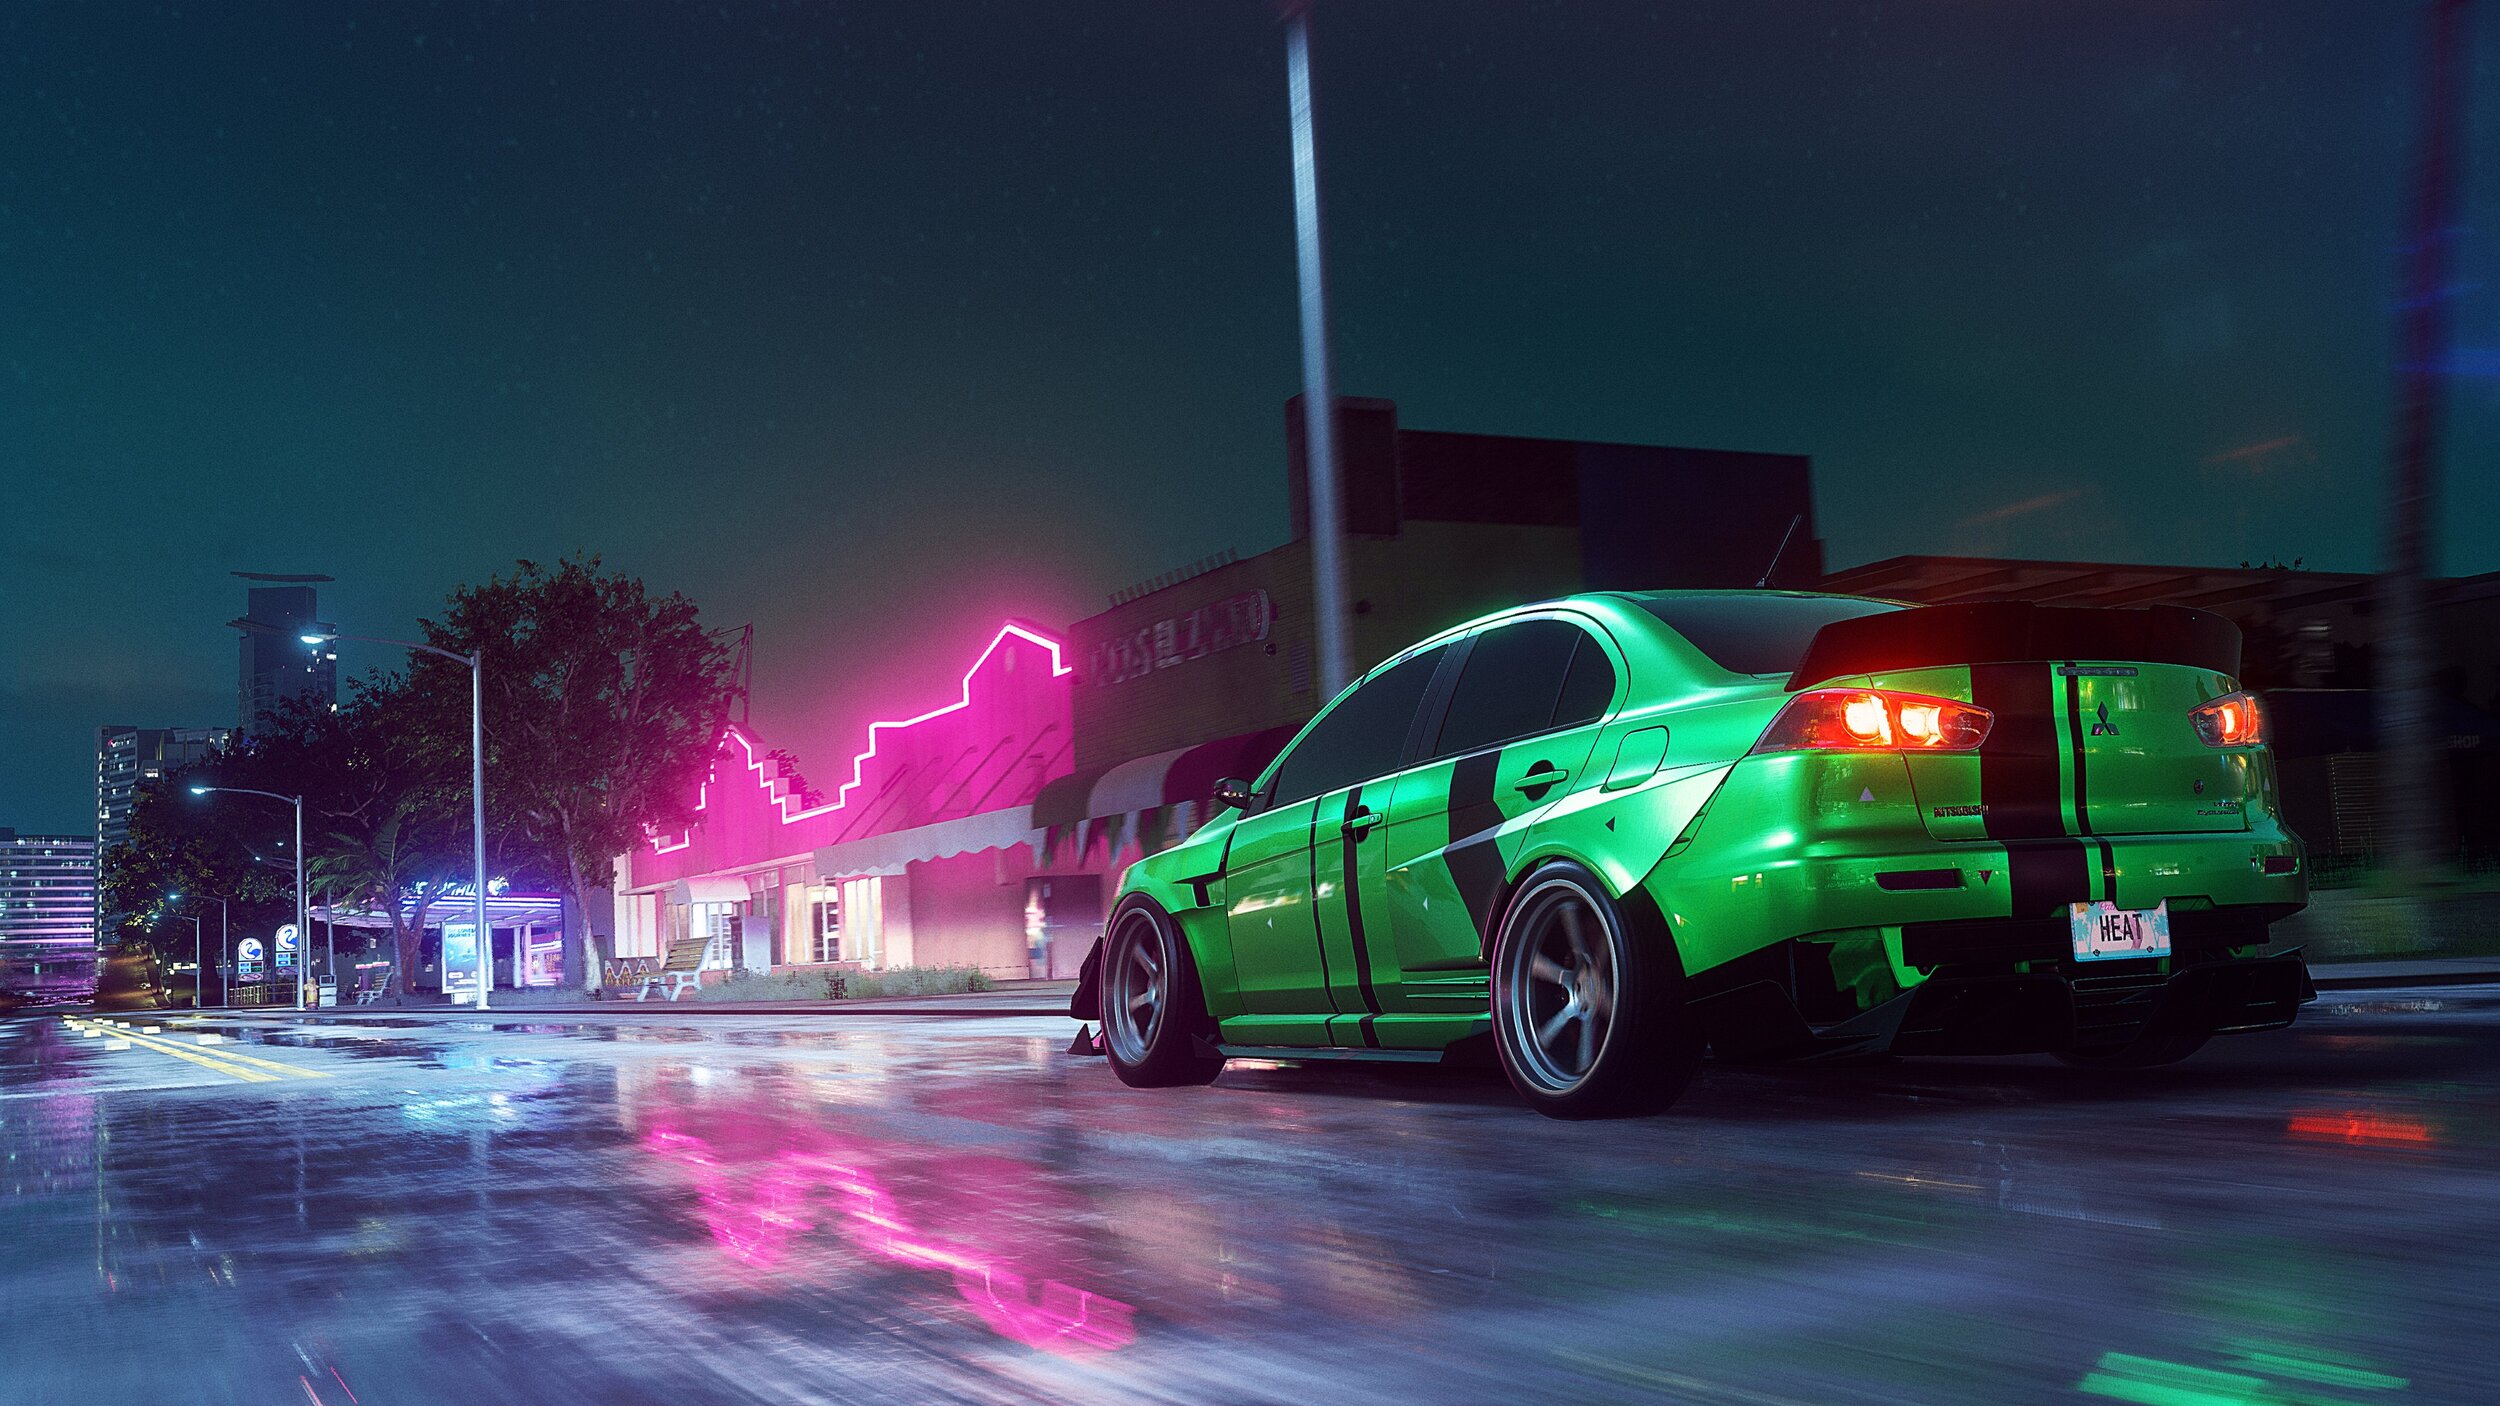 Need for Speed goes back to Criterion, ending Ghost Games - Polygon